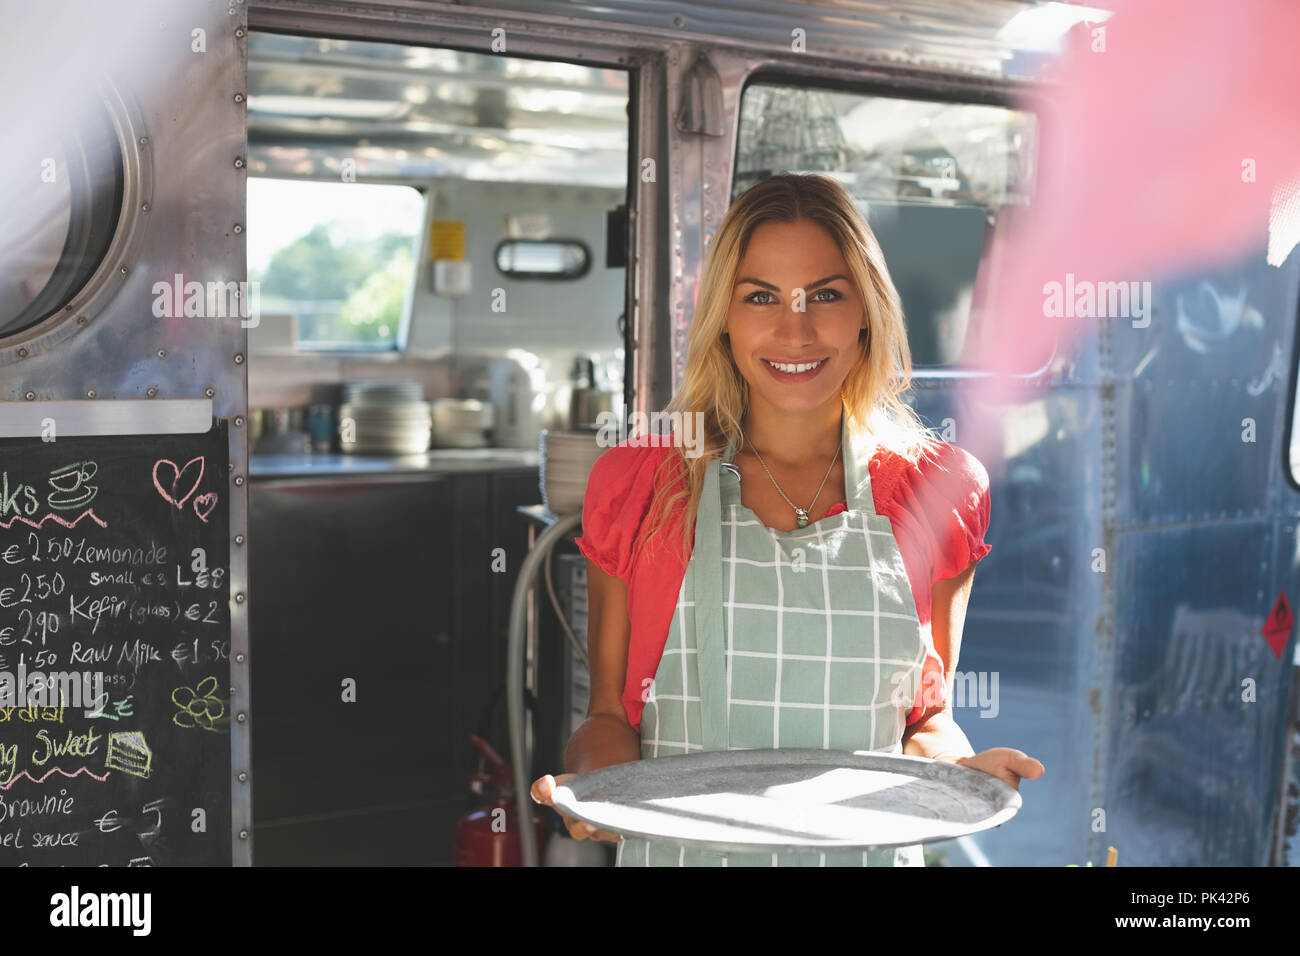 Female waitress standing in food truck Stock Photo